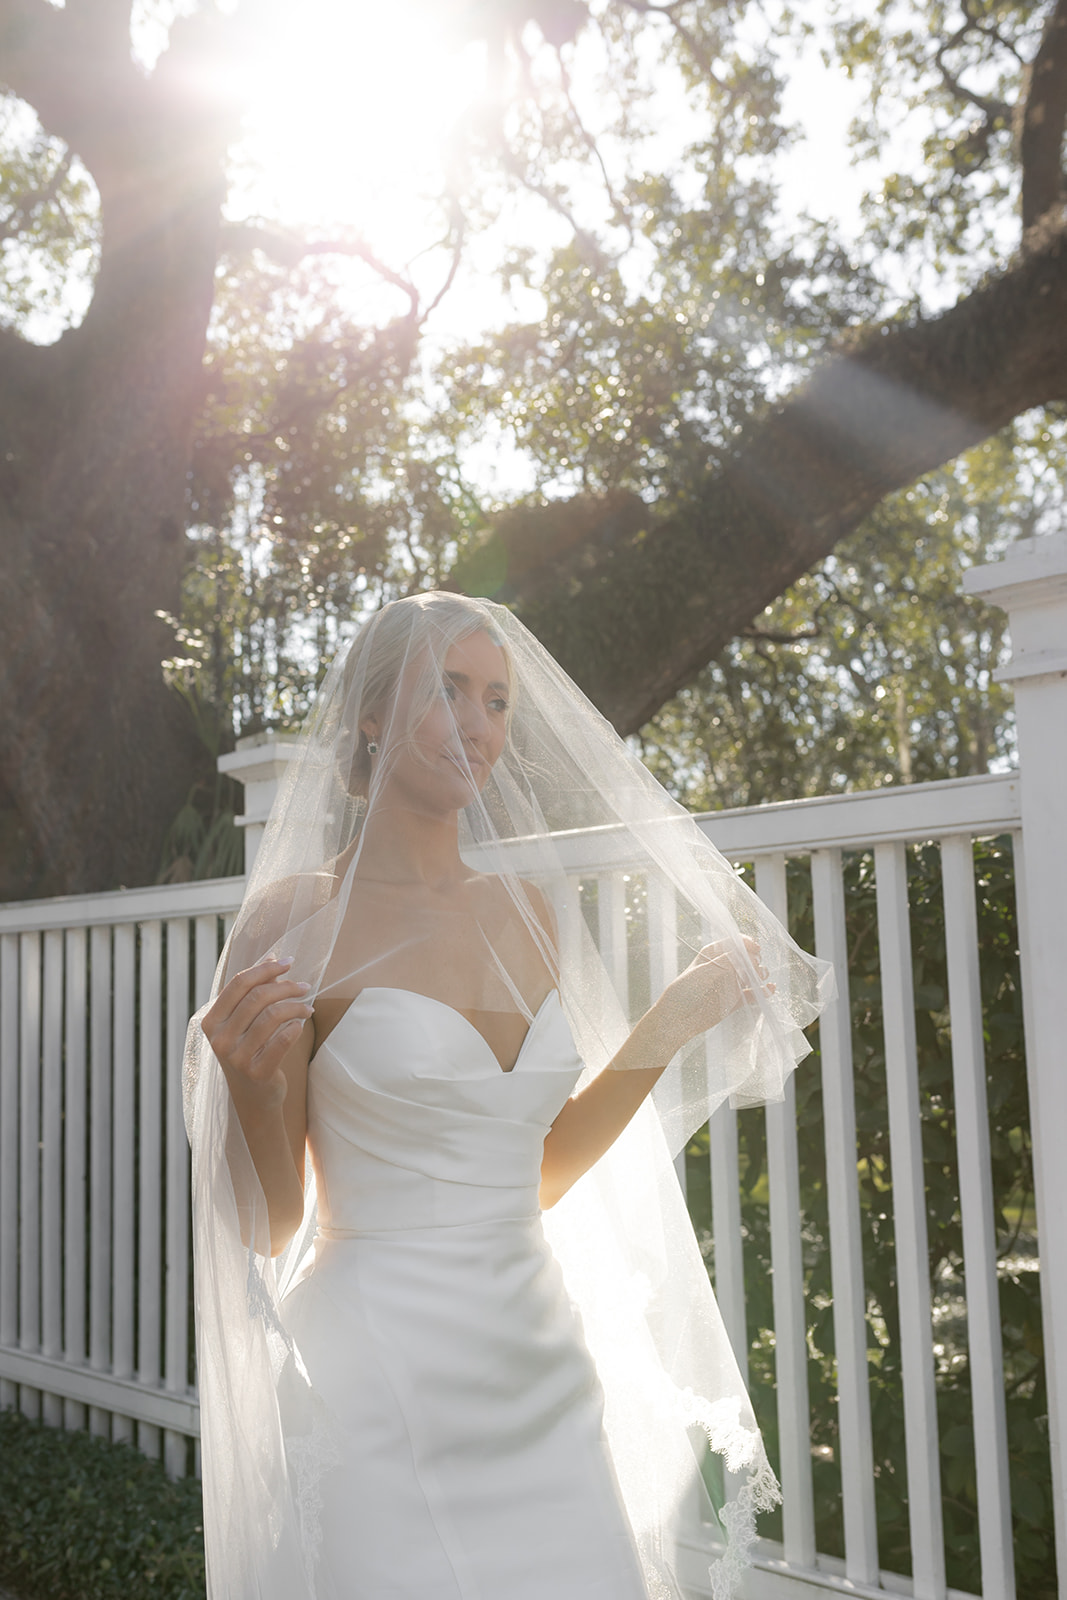 Bride walking outside. White fence and oak trees in background sunlight hitting wedding veil. Perfect situation to show wedding dress in Charleston